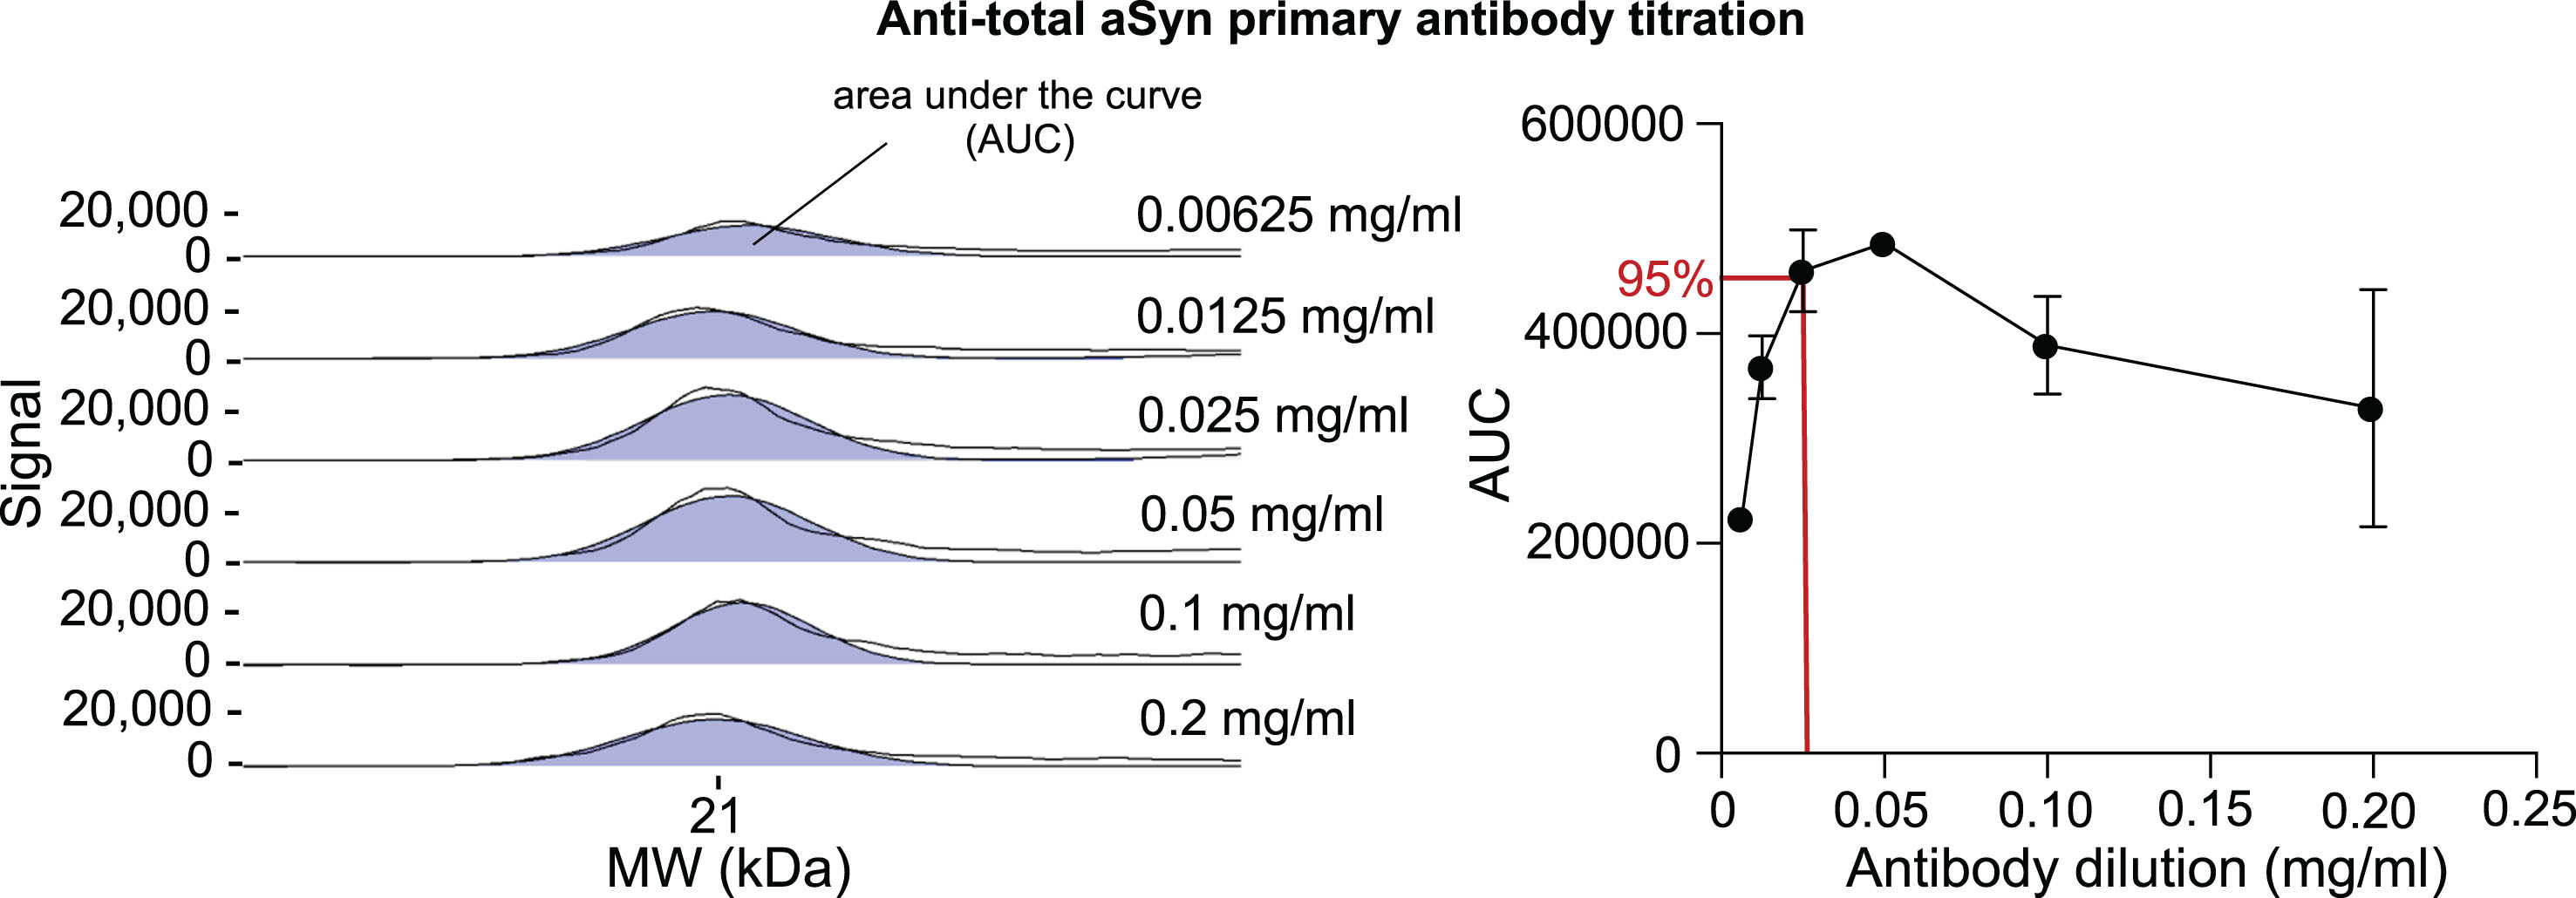 Optimization of anti-total aSyn antibody dilution for CE in midbrain tissue. A midbrain tissue lysate with a protein concentration of 0.2 mg/ml was subjected to CE Simple Western immunoassay using anti-total aSyn antibody in a range of dilutions (1 : 160, 1 : 80, 1 : 40, 1 : 20, 1 : 10, 1 : 5). The total aSyn signal is shown as the area under the curve (AUC) in the selected electropherograms (left). The two black lines in each electropherogram represent both the original curve and an adaptation to the fitted peaks. Values for the AUC at 21 kDa of different antibody dilutions were automatically quantified by the Compass for Simple Western software and depicted as a saturation curve (right). To reach a 95-99% antibody saturation range, a protein concentration of 0.025 mg/ml (1 : 40) for the anti-total aSyn antibody is required (red lines). This dilution was used for all subsequent experiments, including the detection of total aSyn in different tissues.